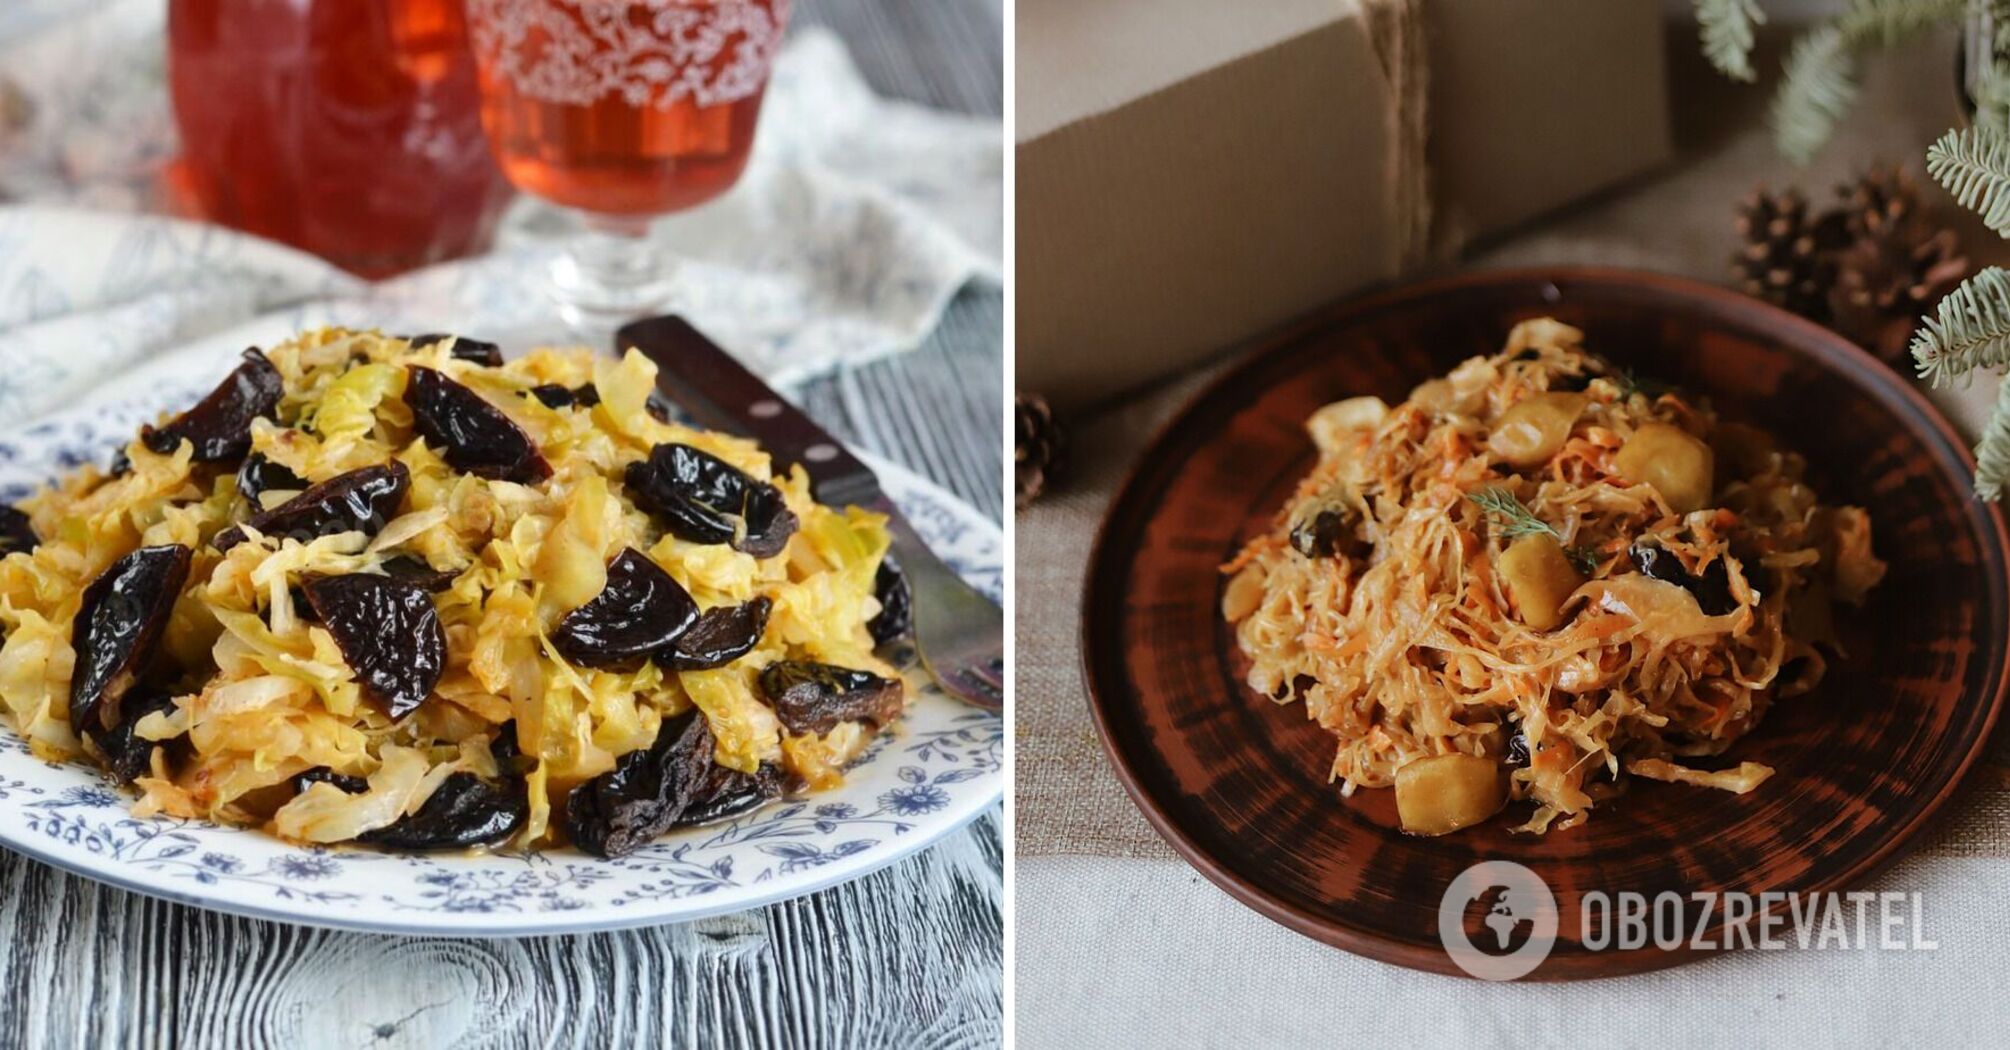 Braised cabbage with prunes: an unusual idea for a simple dish